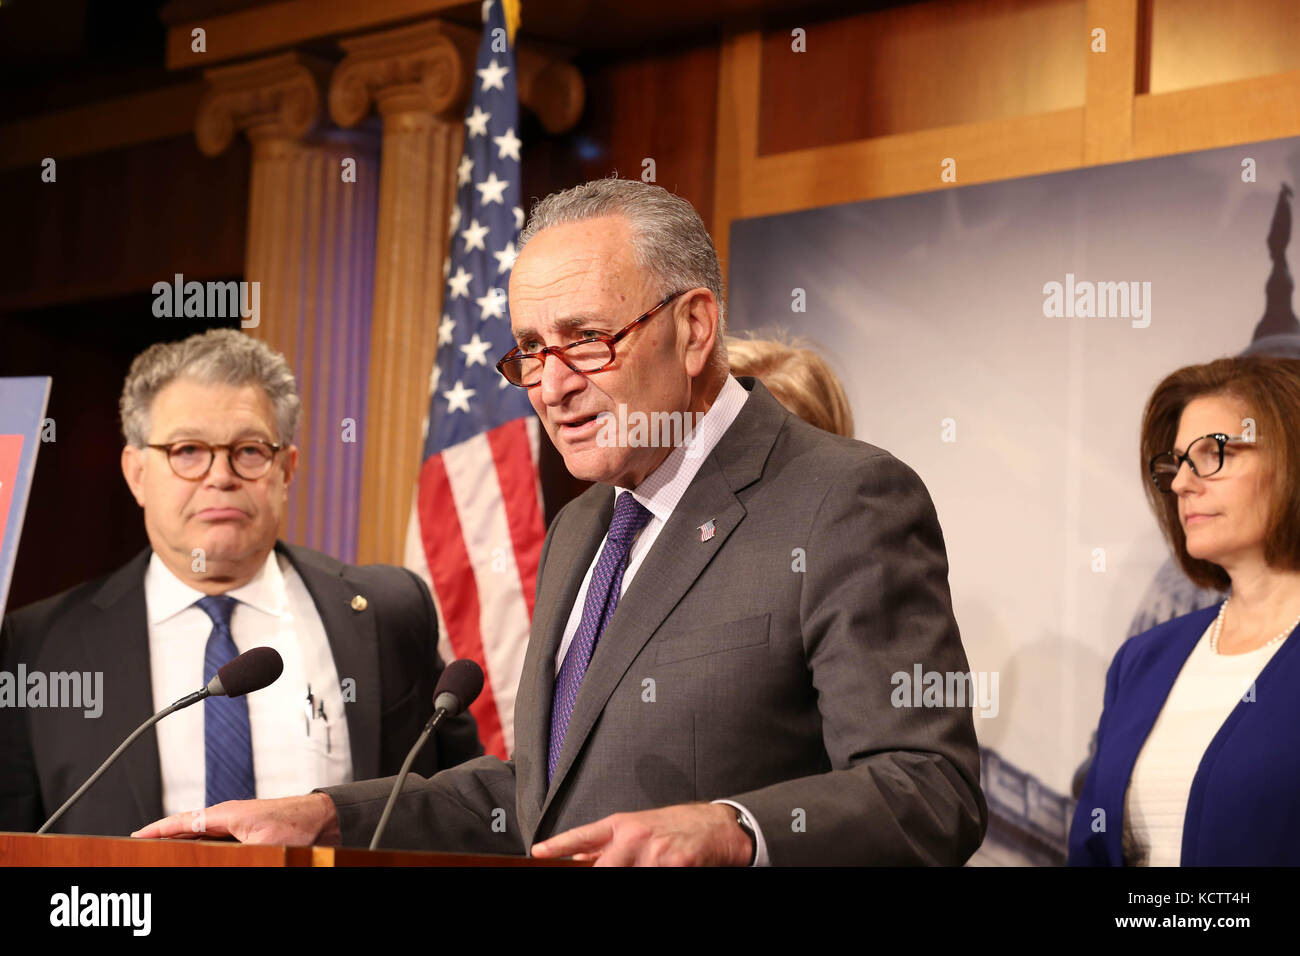 U.S Senator Minority Leader Chuck Schumer of New York, alongside fellow Democrats holds a press conference in the wake of a massive data breach at Equifax and a scandal at Wells Fargo on Capitol Hill September 27, 2017 in Washington, DC. Stock Photo